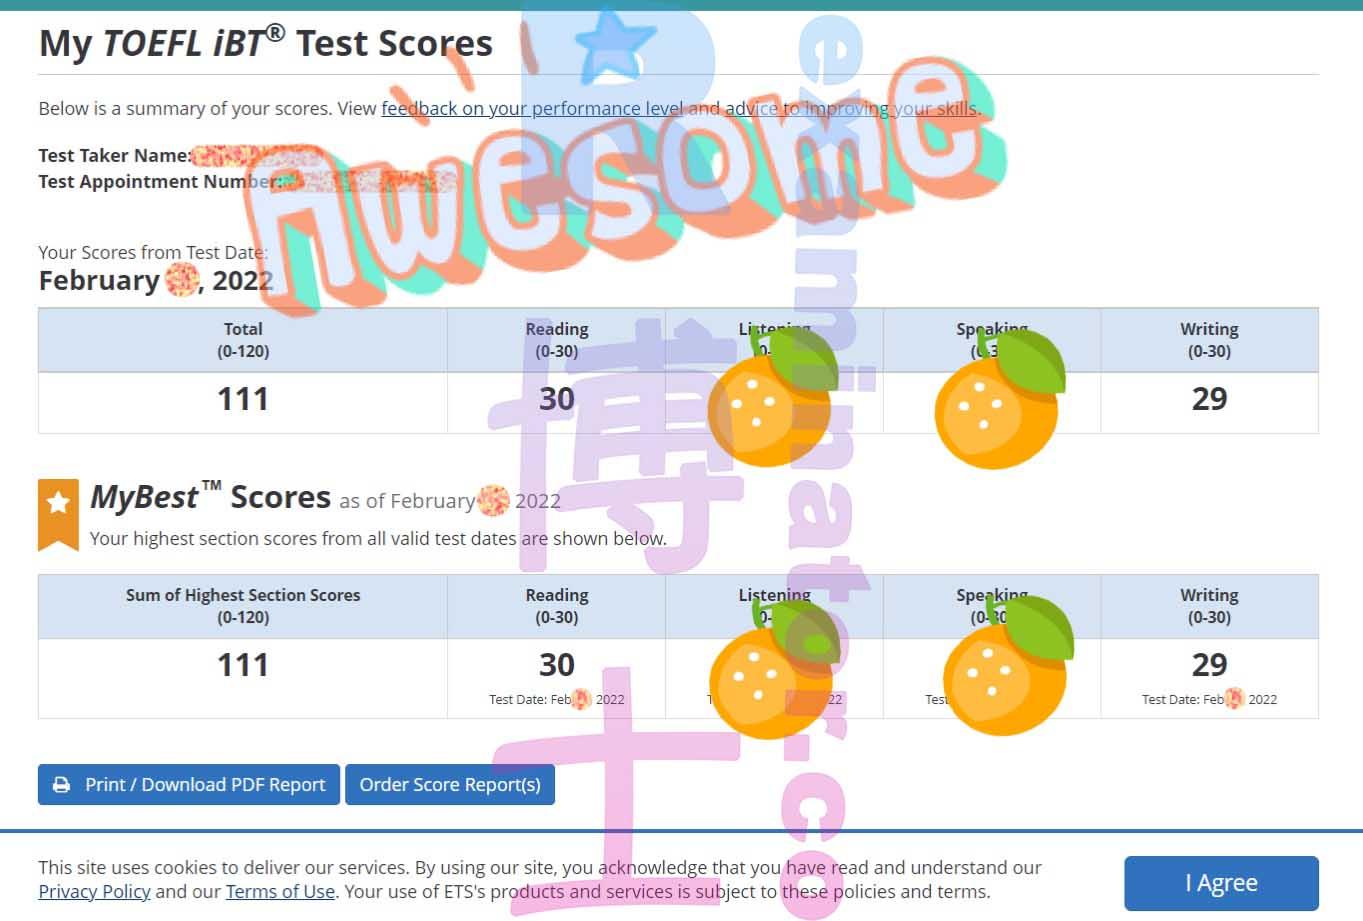 score image for TOEFL Cheating success story #273